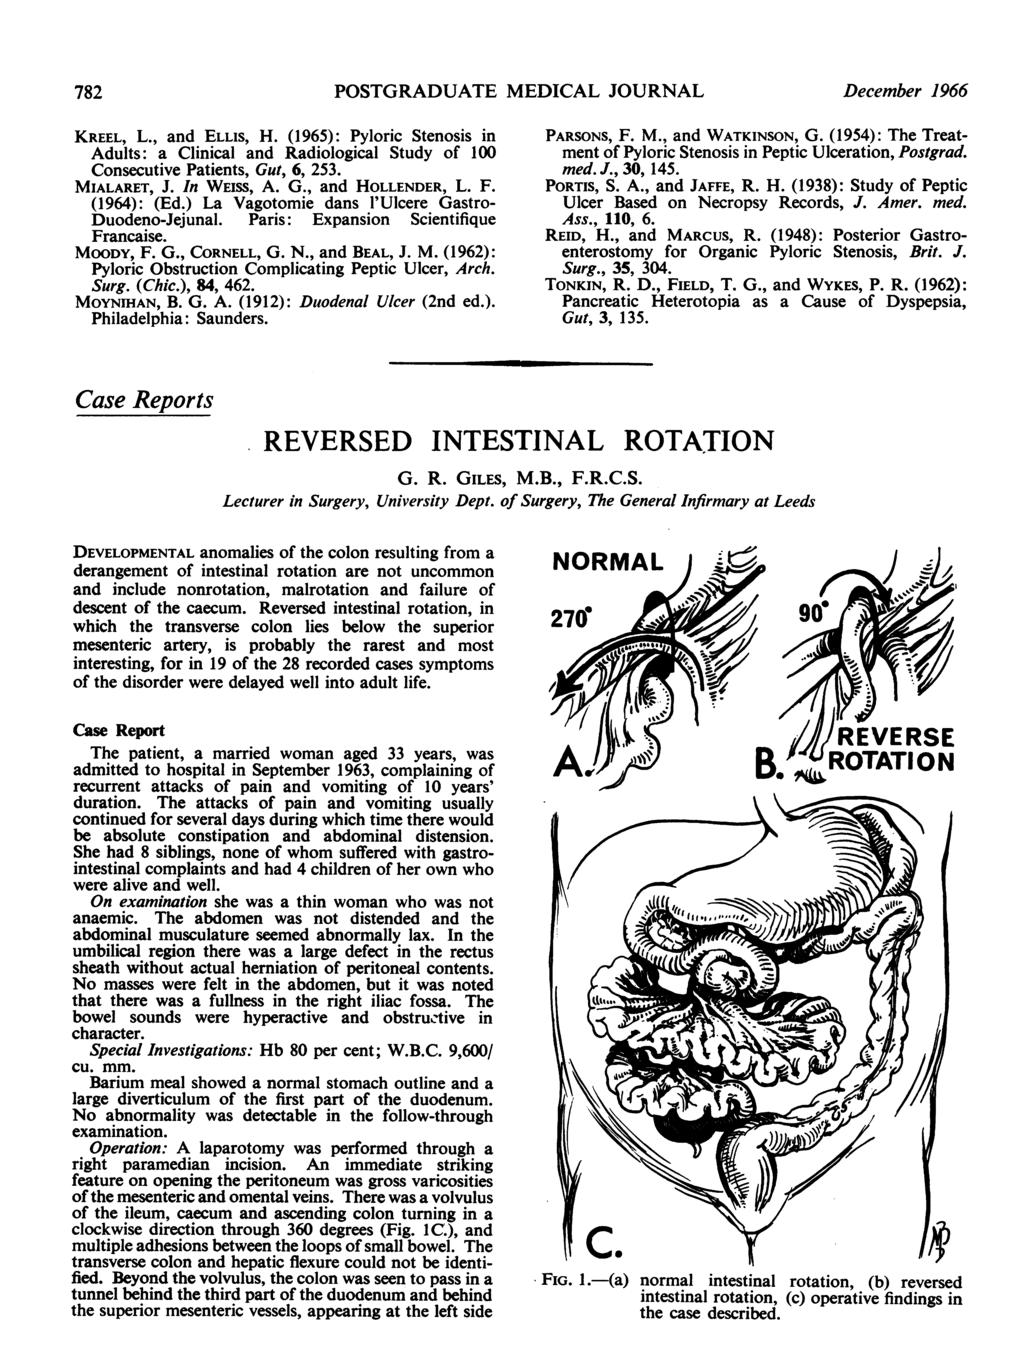 782 POSTGRADUATE MEDICAL JOURNAL December 1966 KREEL, L., and ELLIS, H. (1965): Pyloric Stenosis in Adults: a Clinical and Radiological Study of 100 Consecutive Patients, Gut, 6, 253. MIALARET, J.